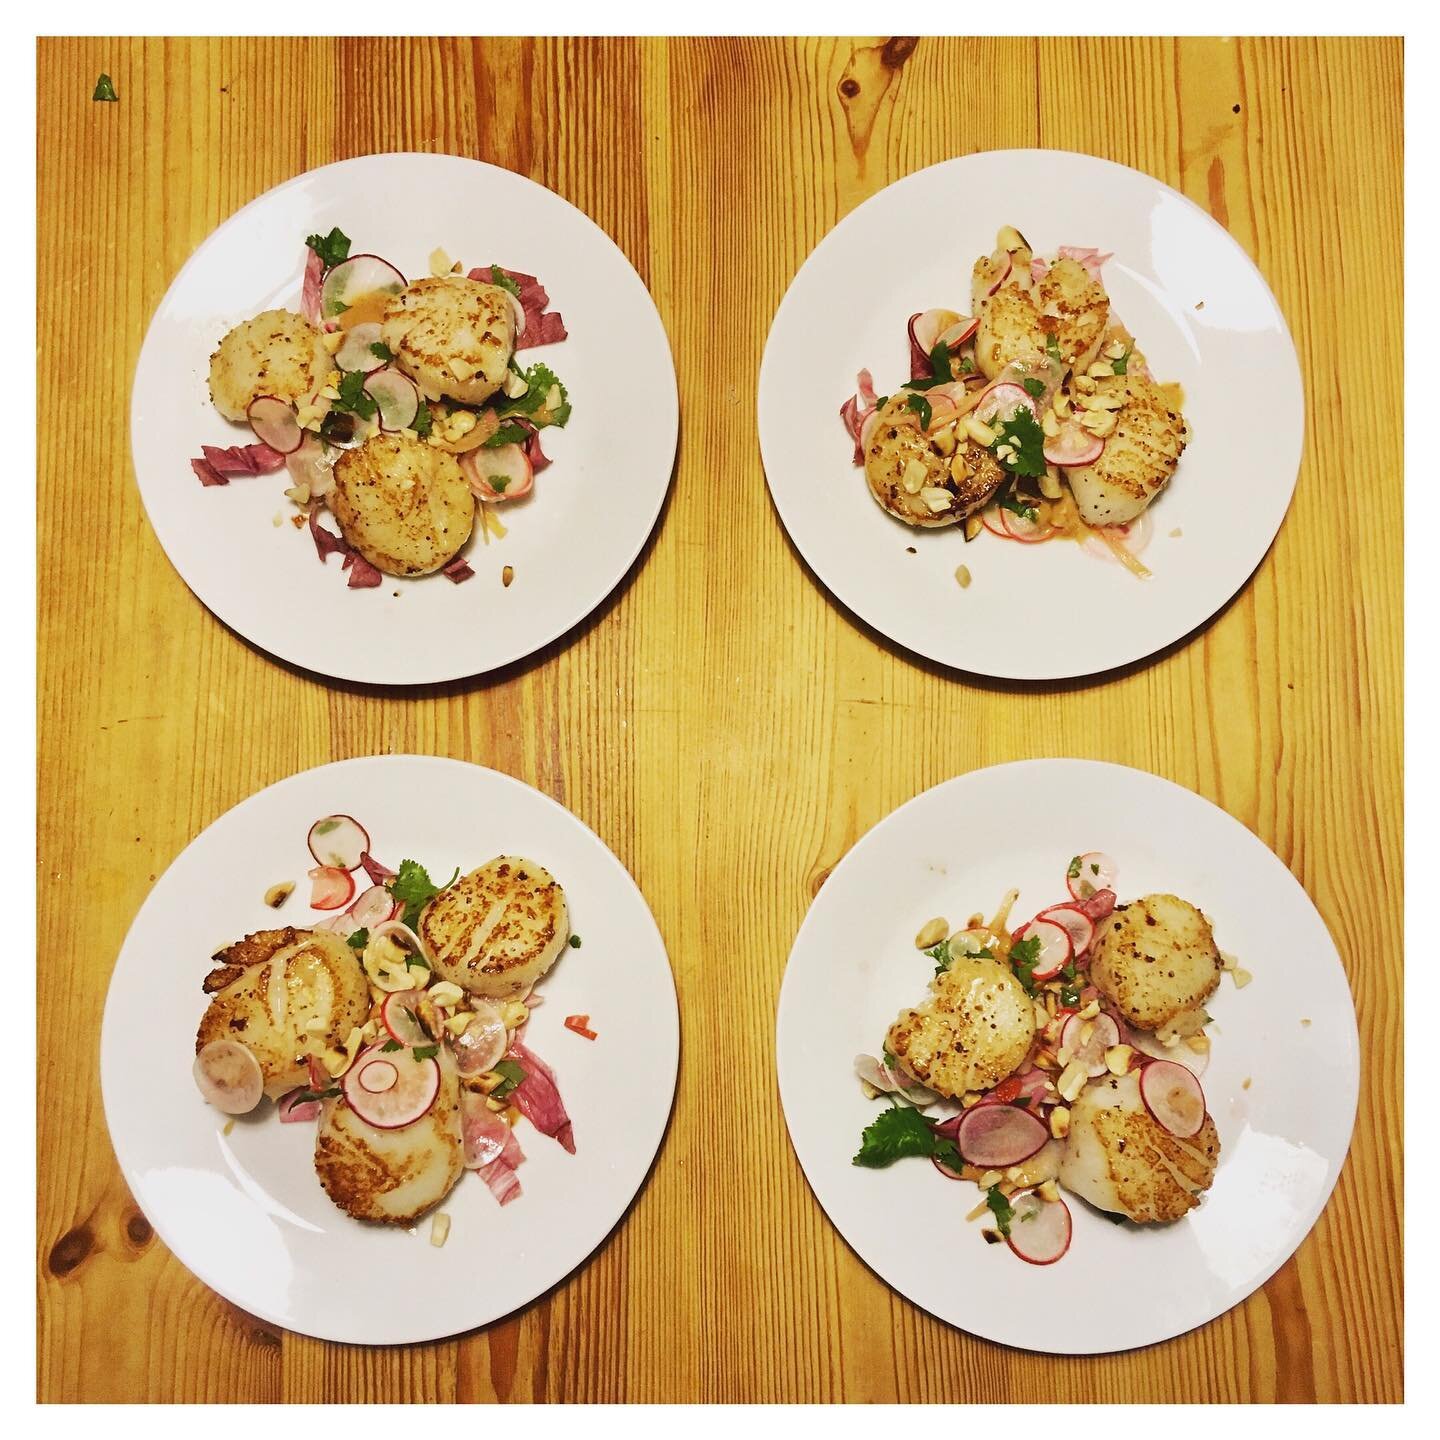 A firm favourite: seared scallops with Asian radish salad and peanut sauce